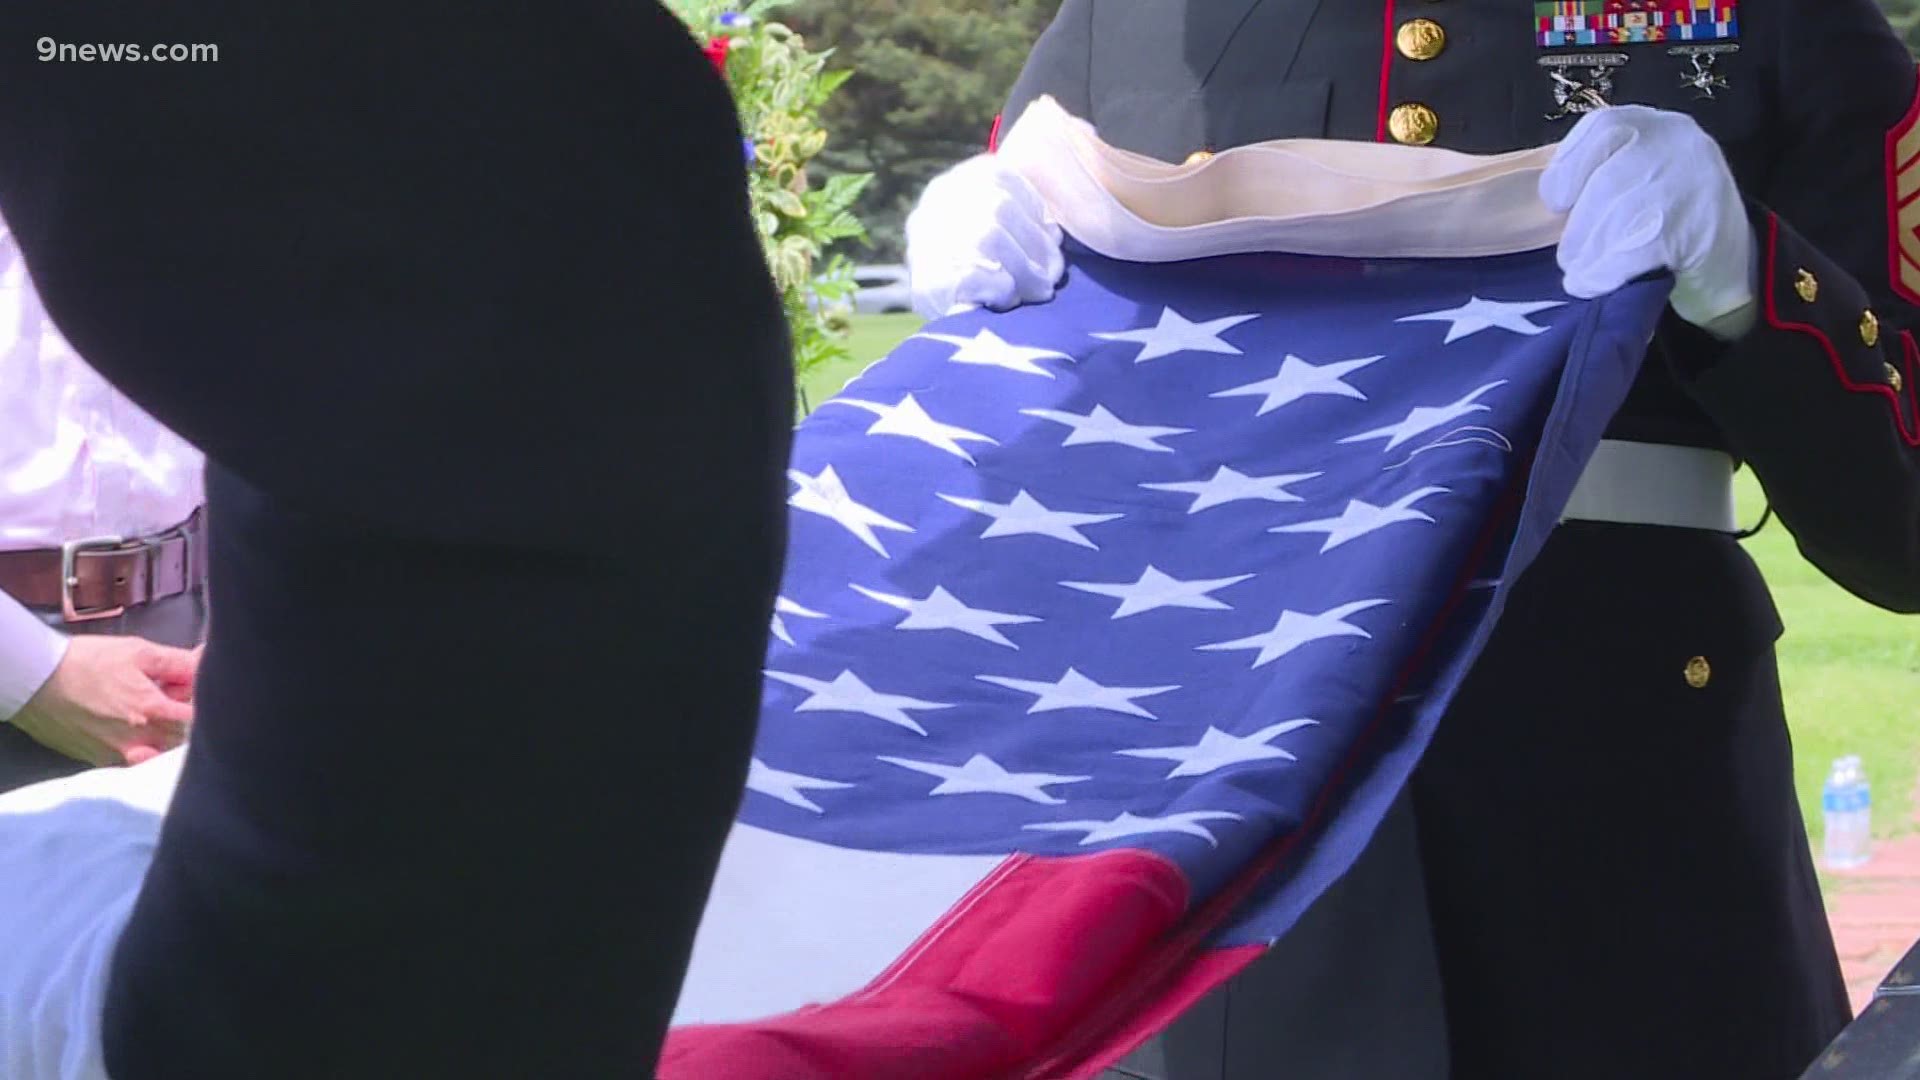 Memorial service for Marine Sgt. Donald Stoddard, who was killed in the Pacific Theater in 1943. His remains were identified last year.